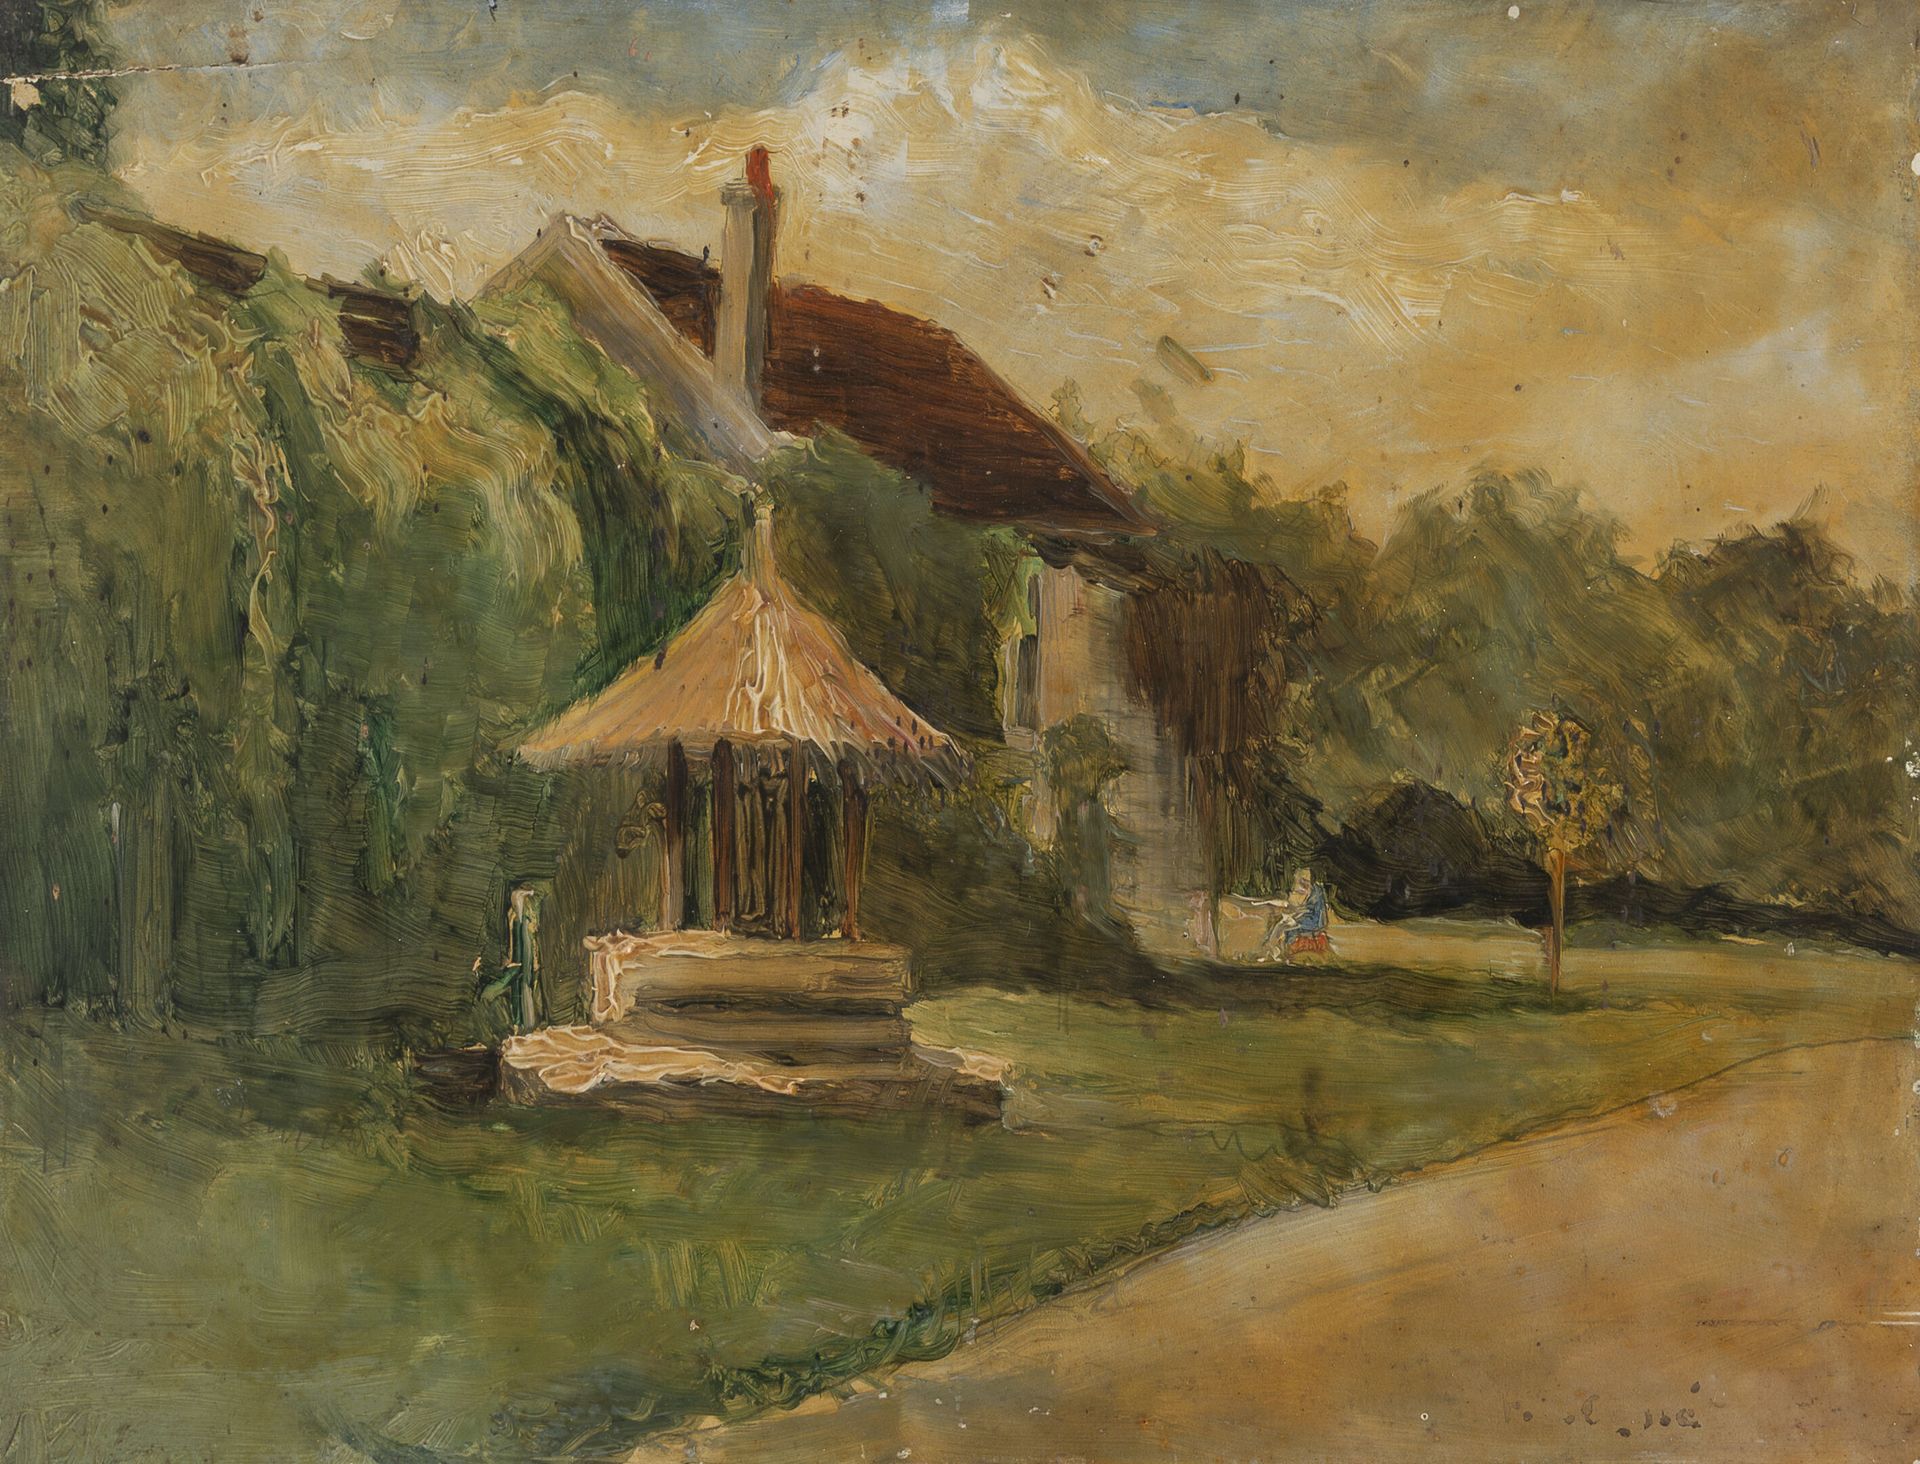 François COGNE (1876-1952) Il mulino, Couilly St Germain, 1912.

Olio su pannell&hellip;